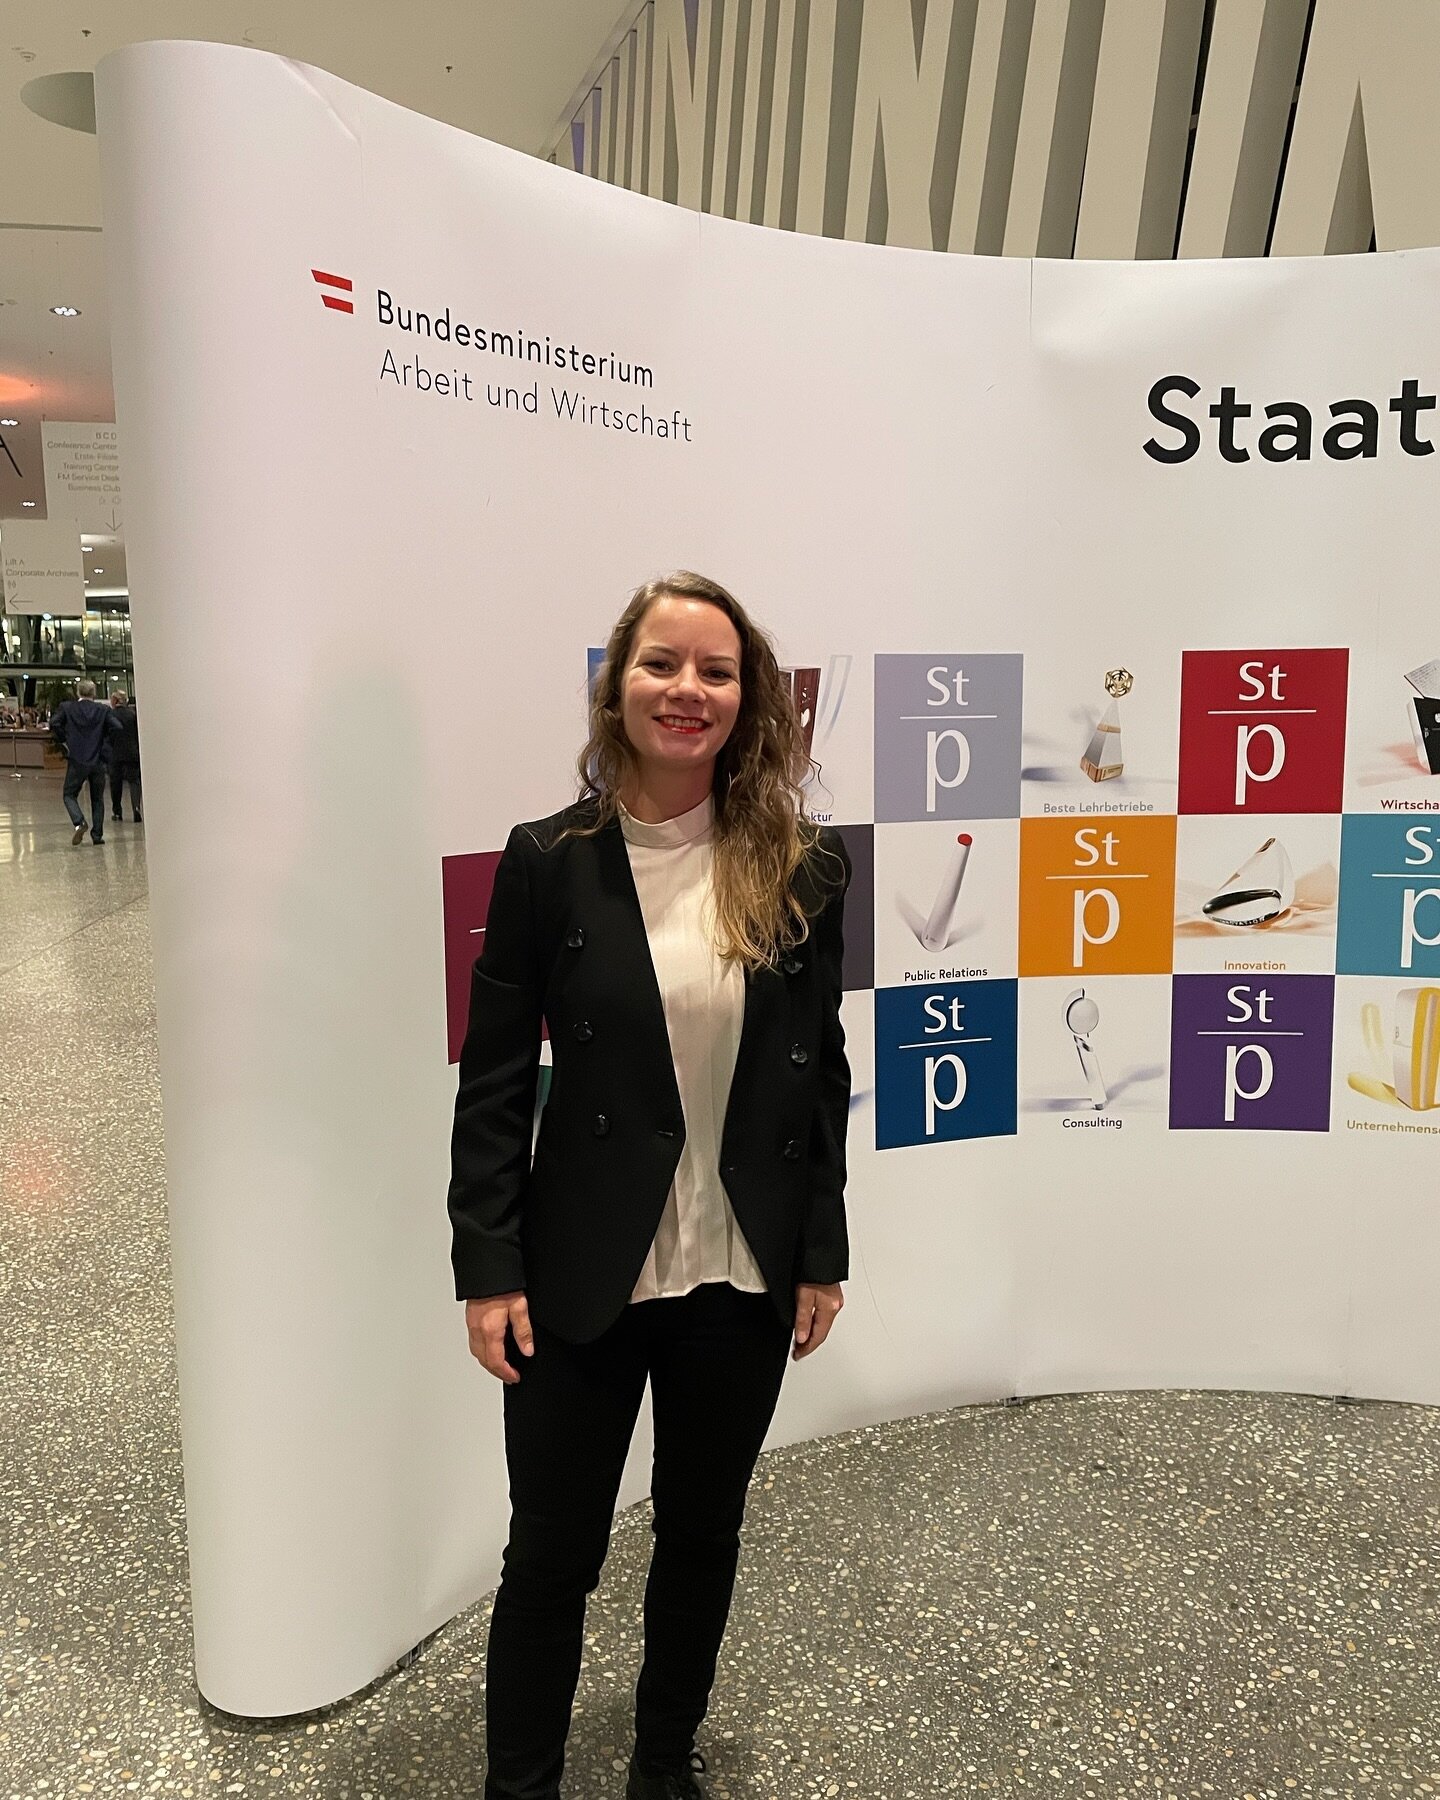 Last week, I also had the opportunity to attend the prize ceremony of the Austrian National Innovation Award in Vienna! A very inspiring event - many interesting companies and innovative technologies were presented, warm congratulations to all the no